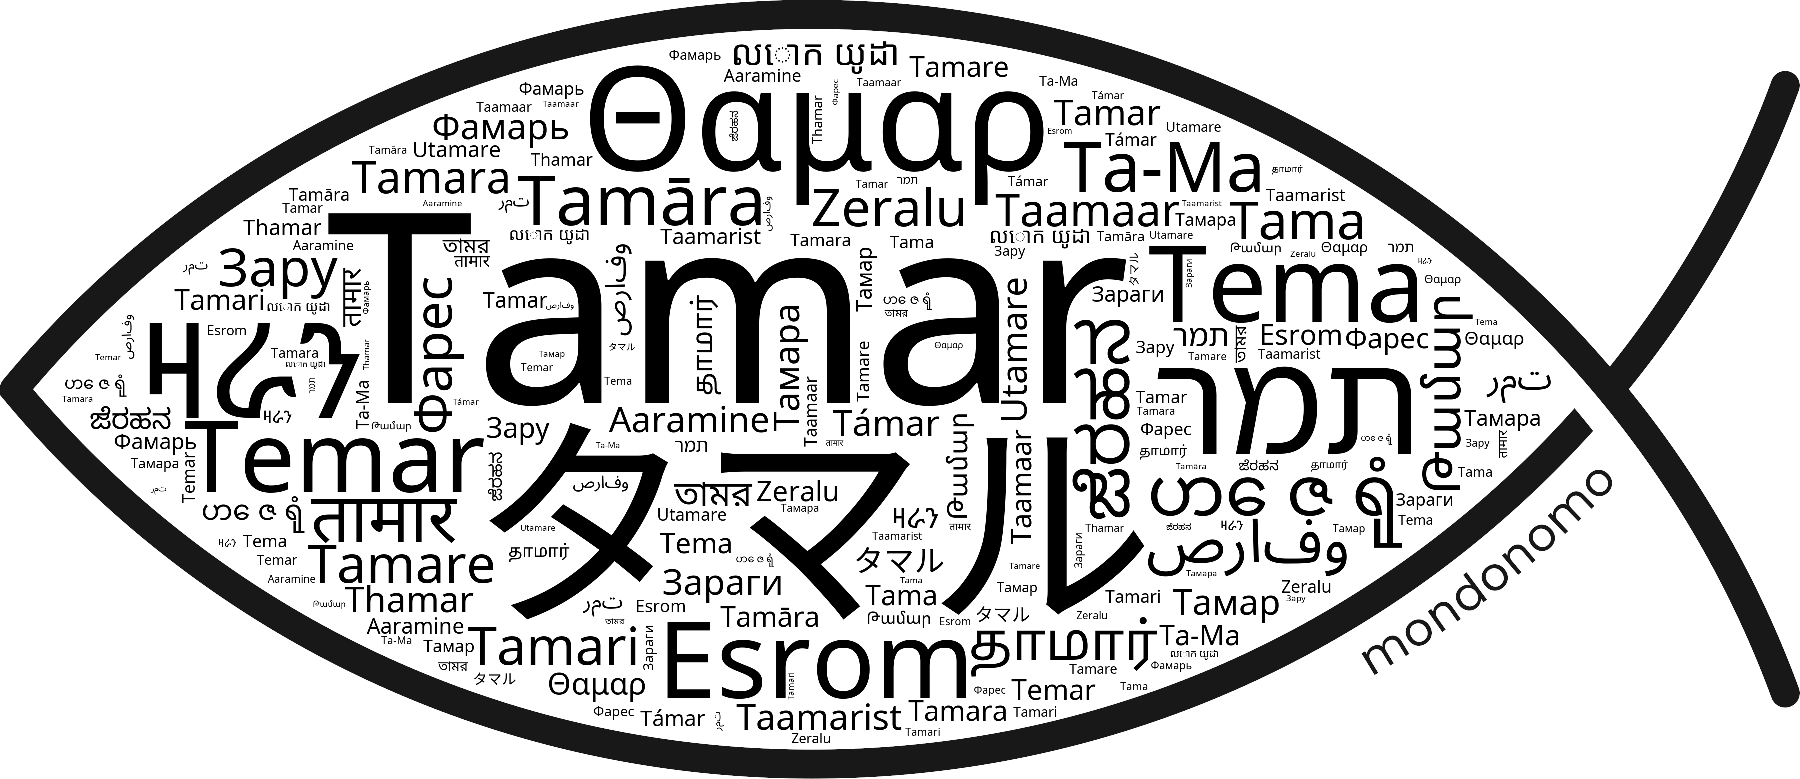 Name Tamar in the world's Bibles